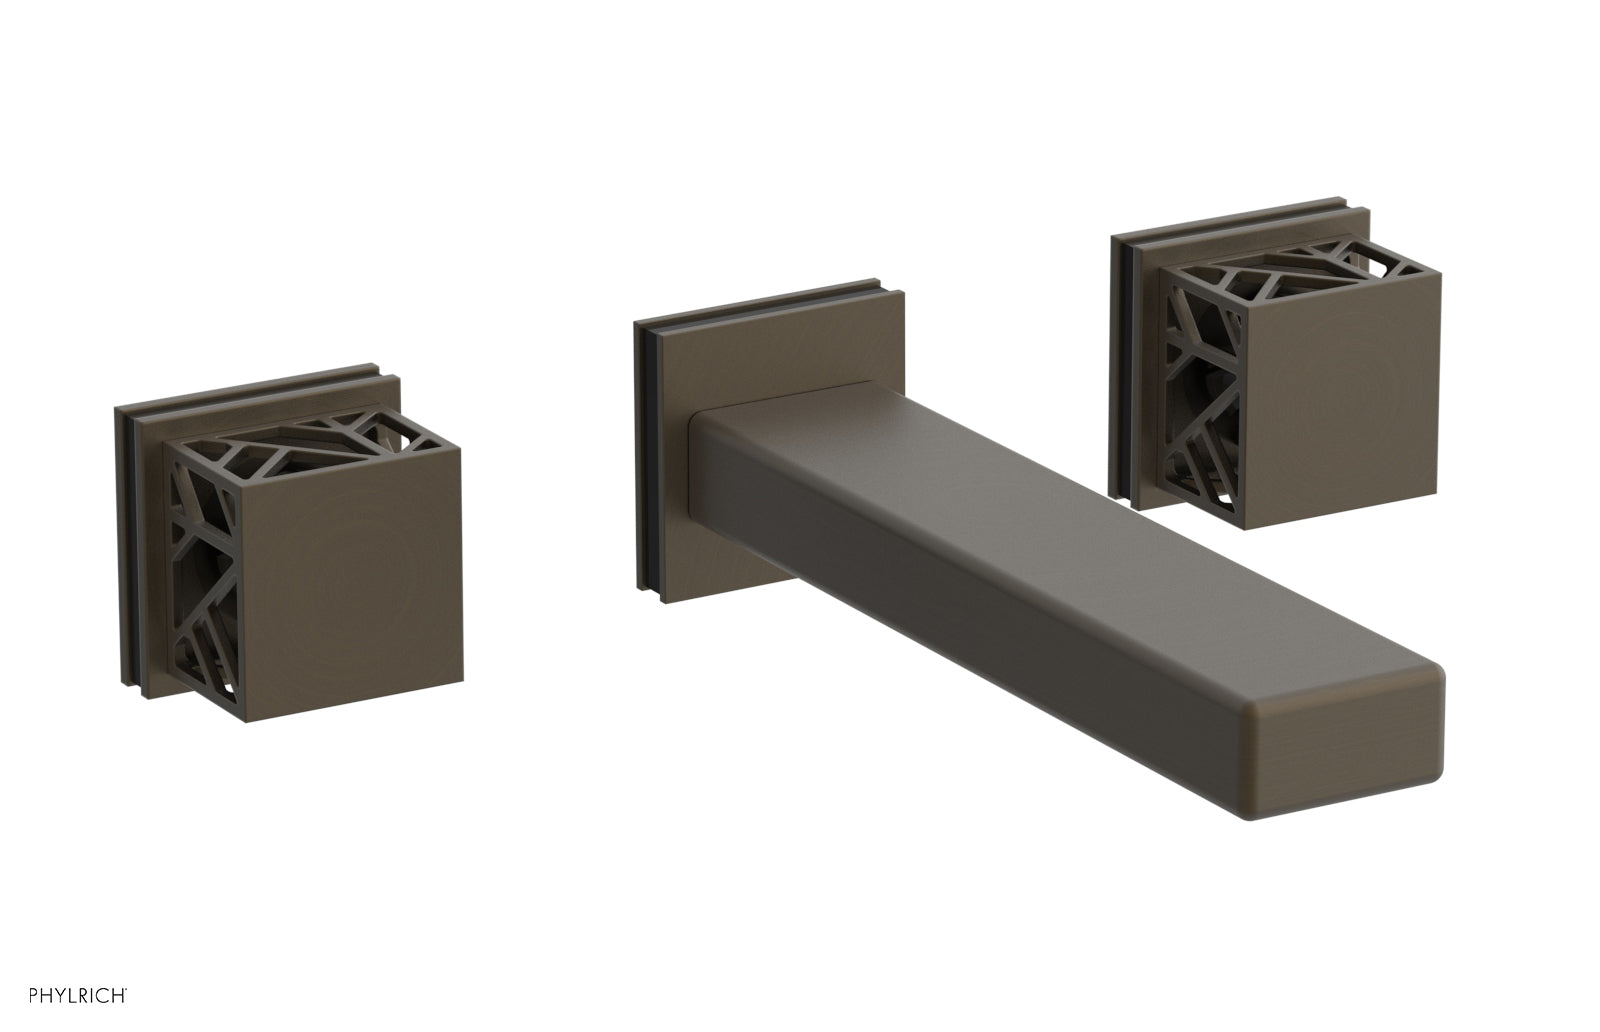 Phylrich JOLIE Wall Tub Set - Square Handles with "Black" Accents